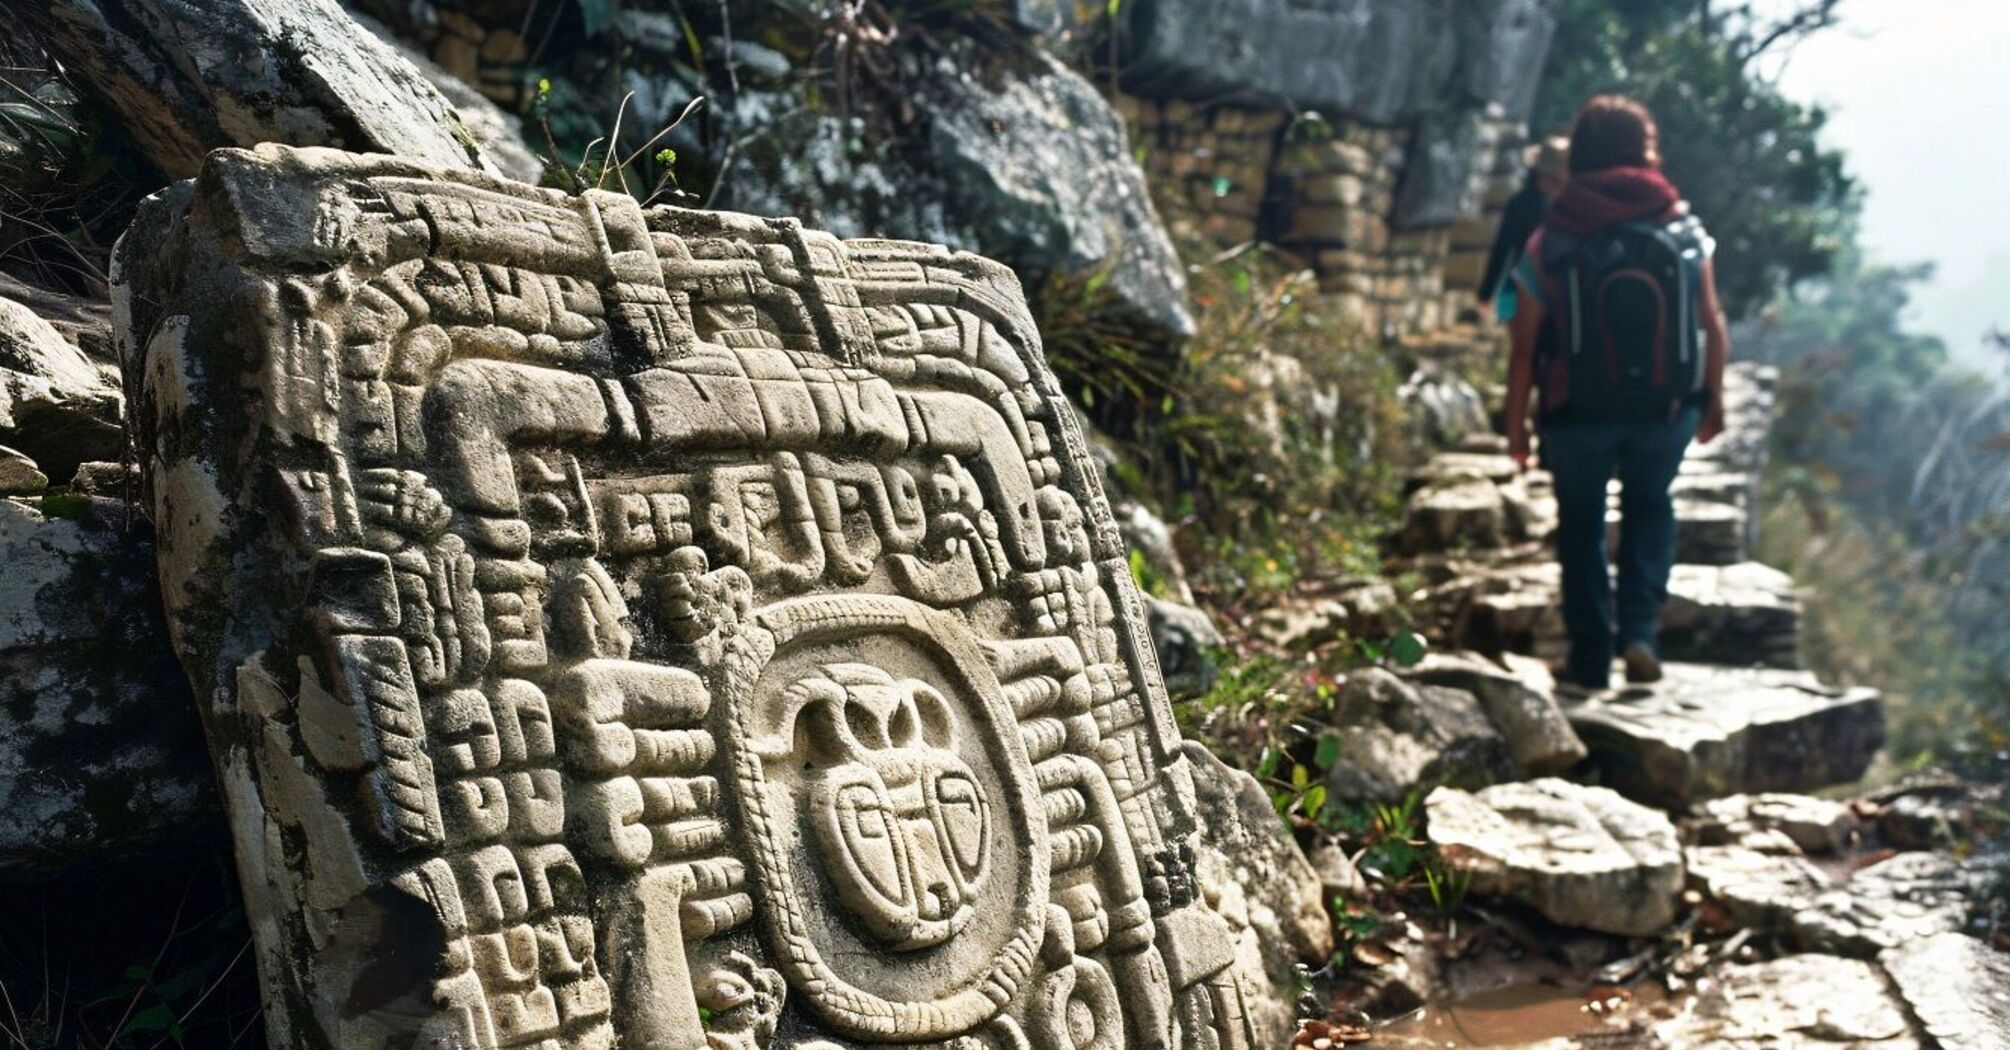 Mayan underground structure and hidden pyramids discovered in Mexico (photo)